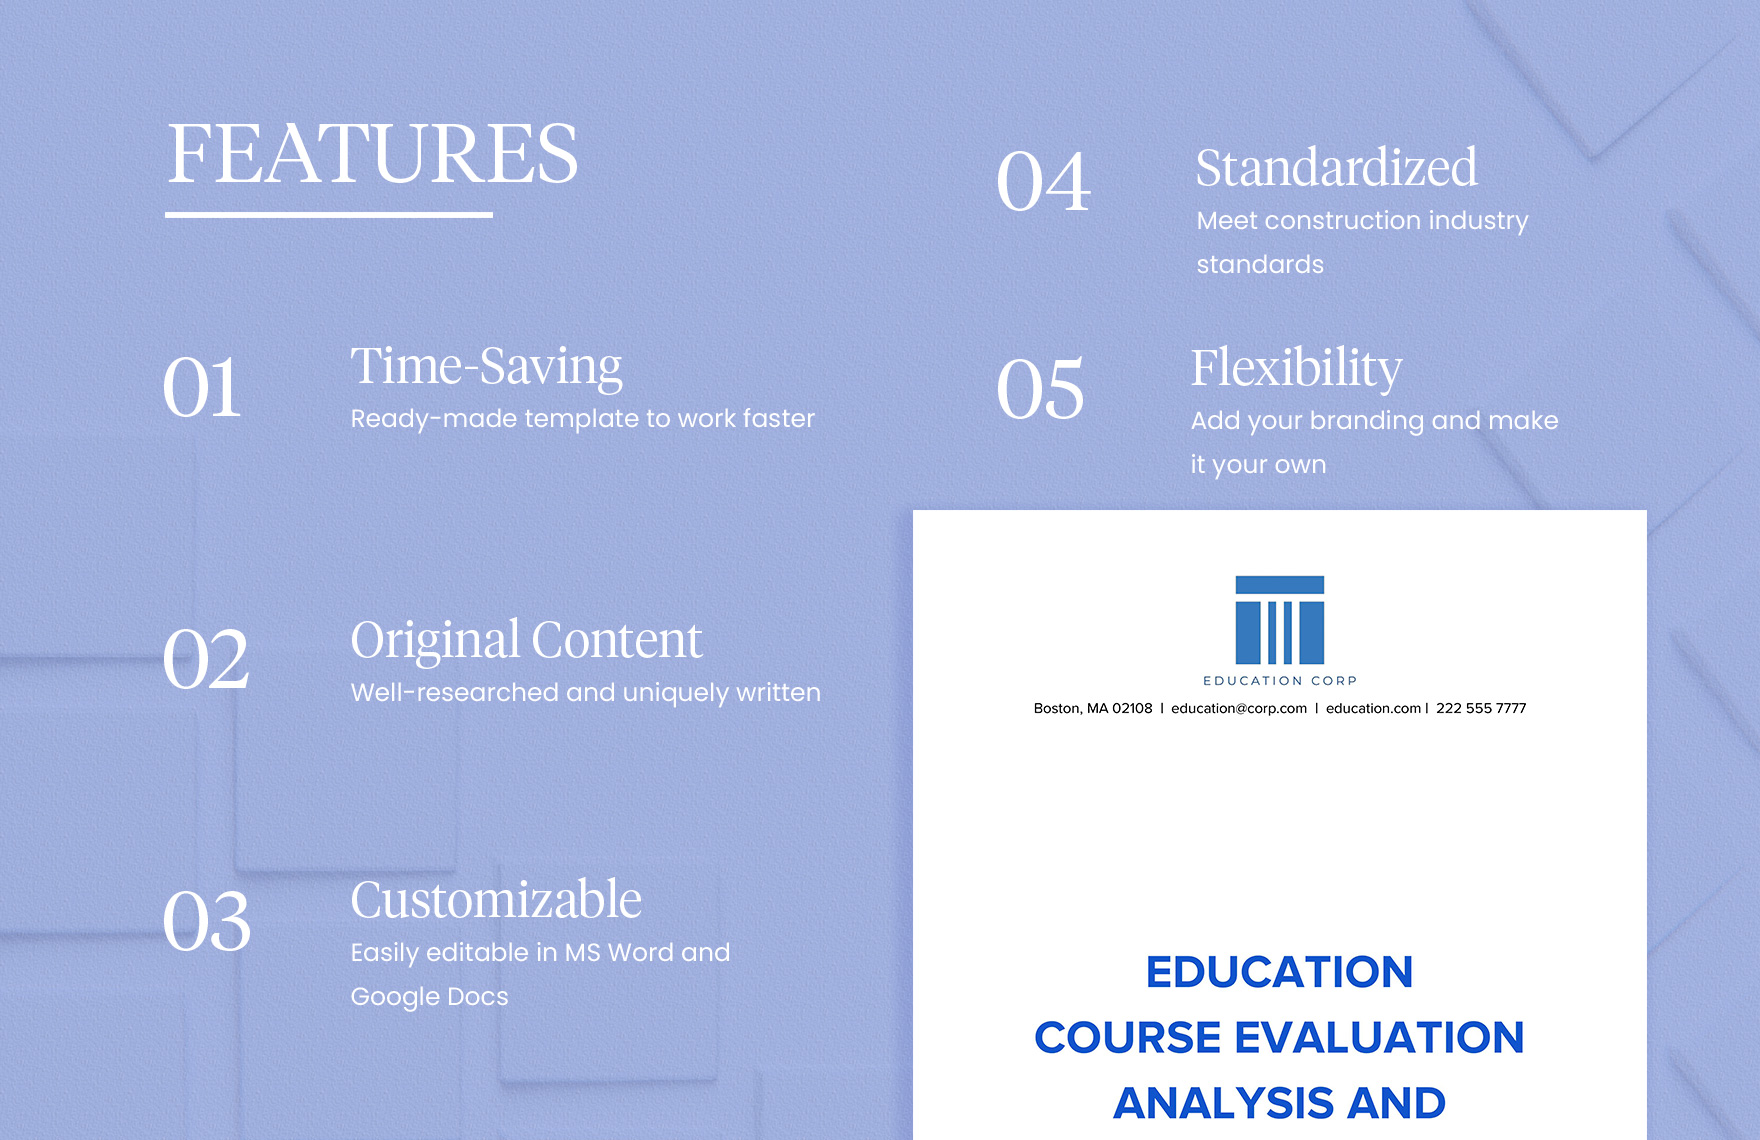 Education Course Evaluation Analysis and Interpretation Guide